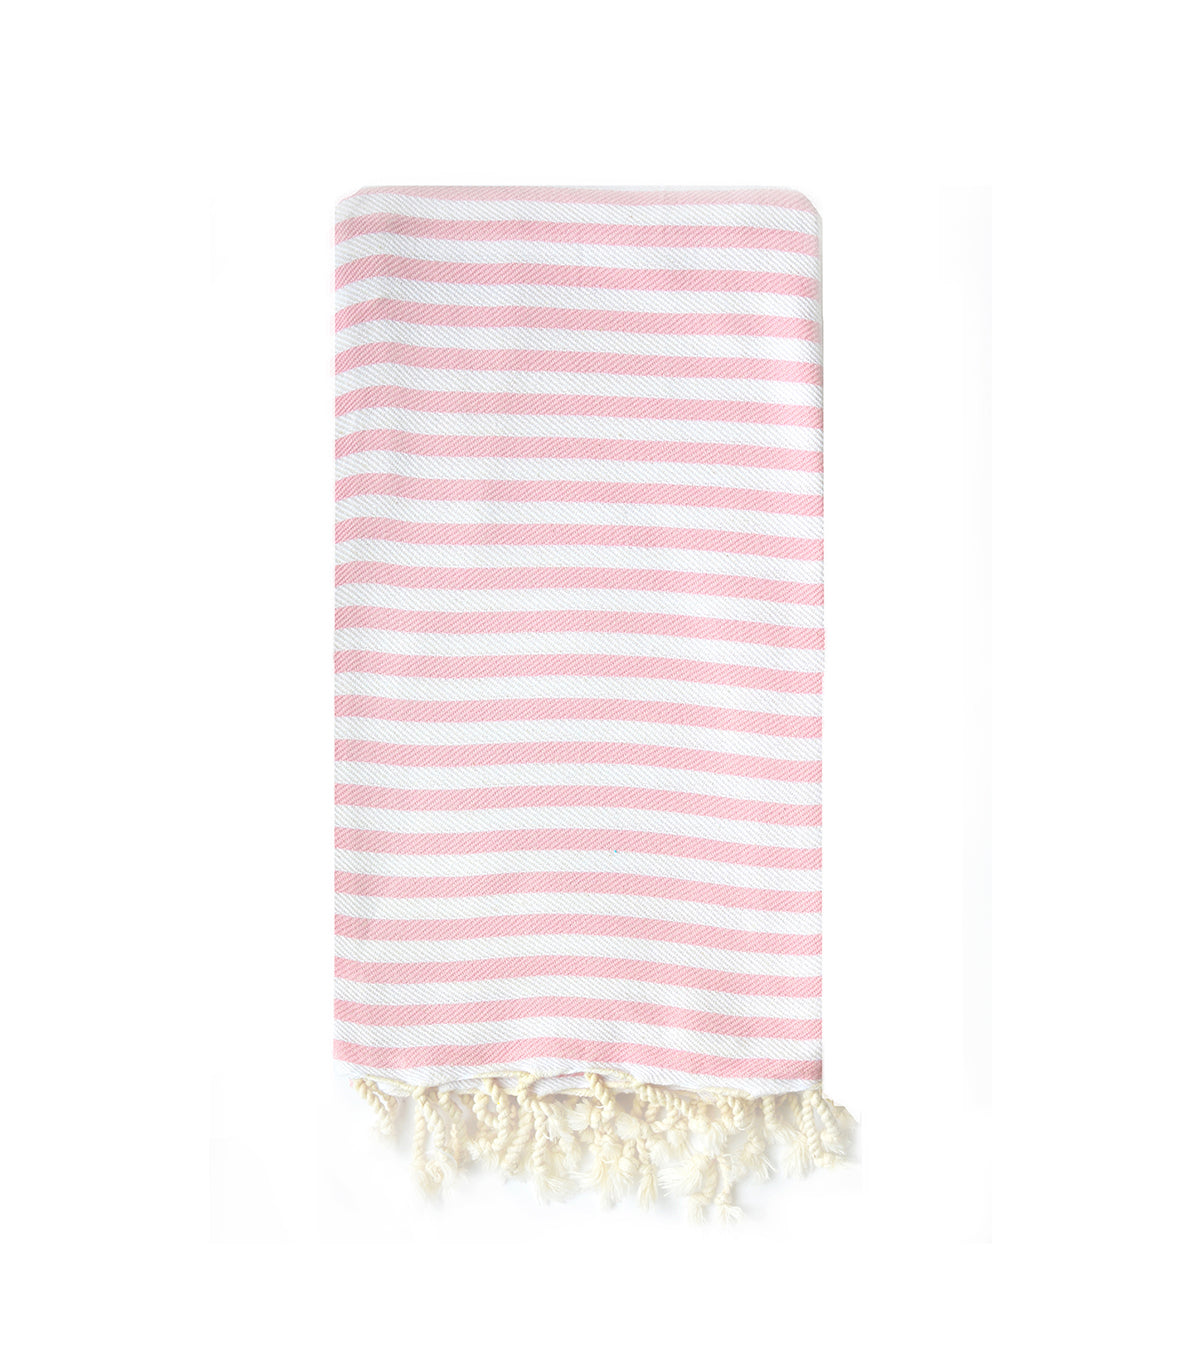 Authentic Turkish Towel | Beach Candy Hand Towel | Turkish-T Exclusive